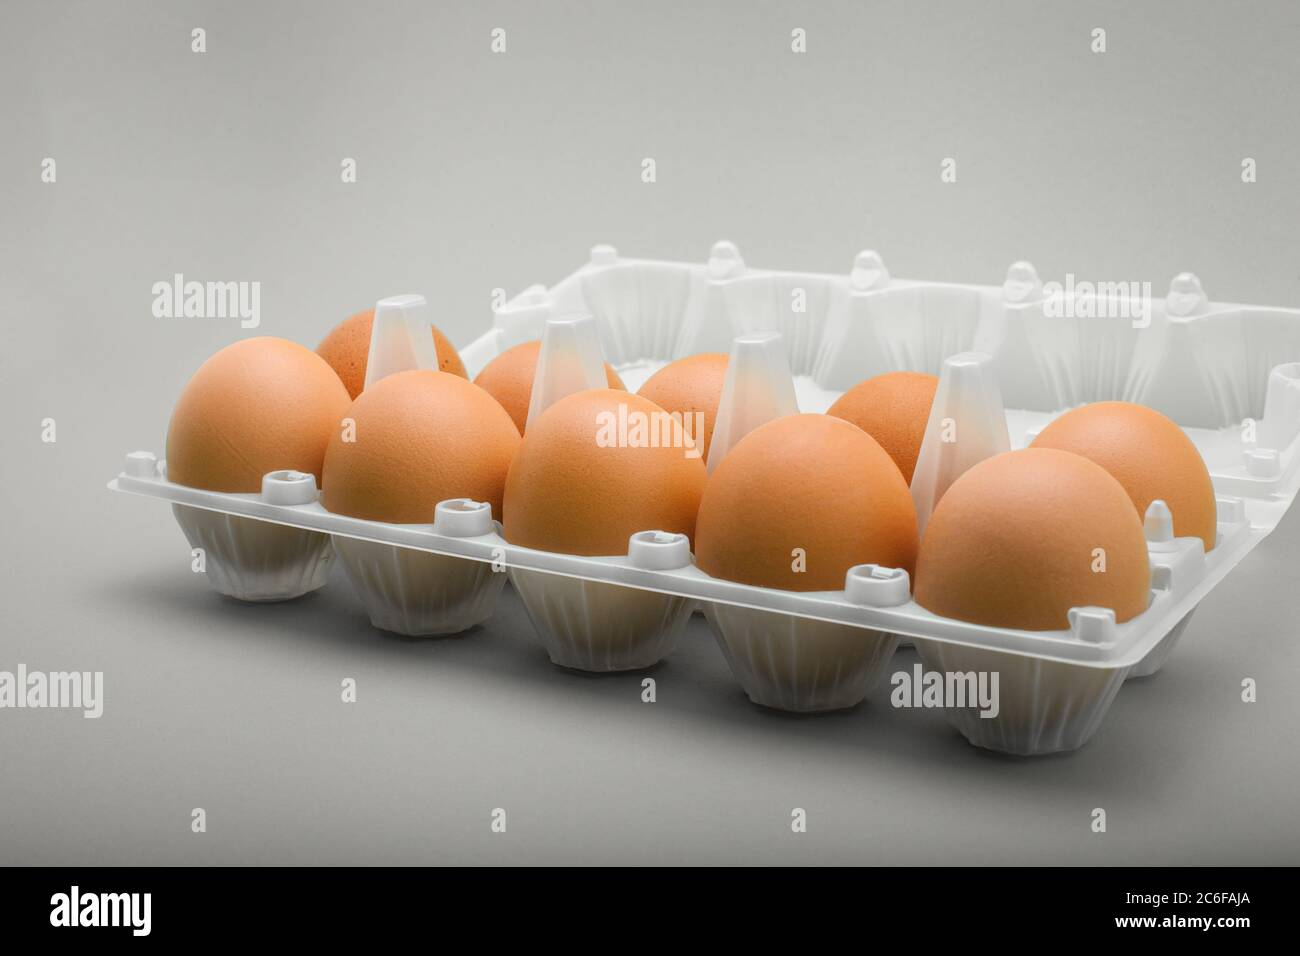 Eggs in a plastic tray, 10 pieces of brown chicken eggs. Stock Photo